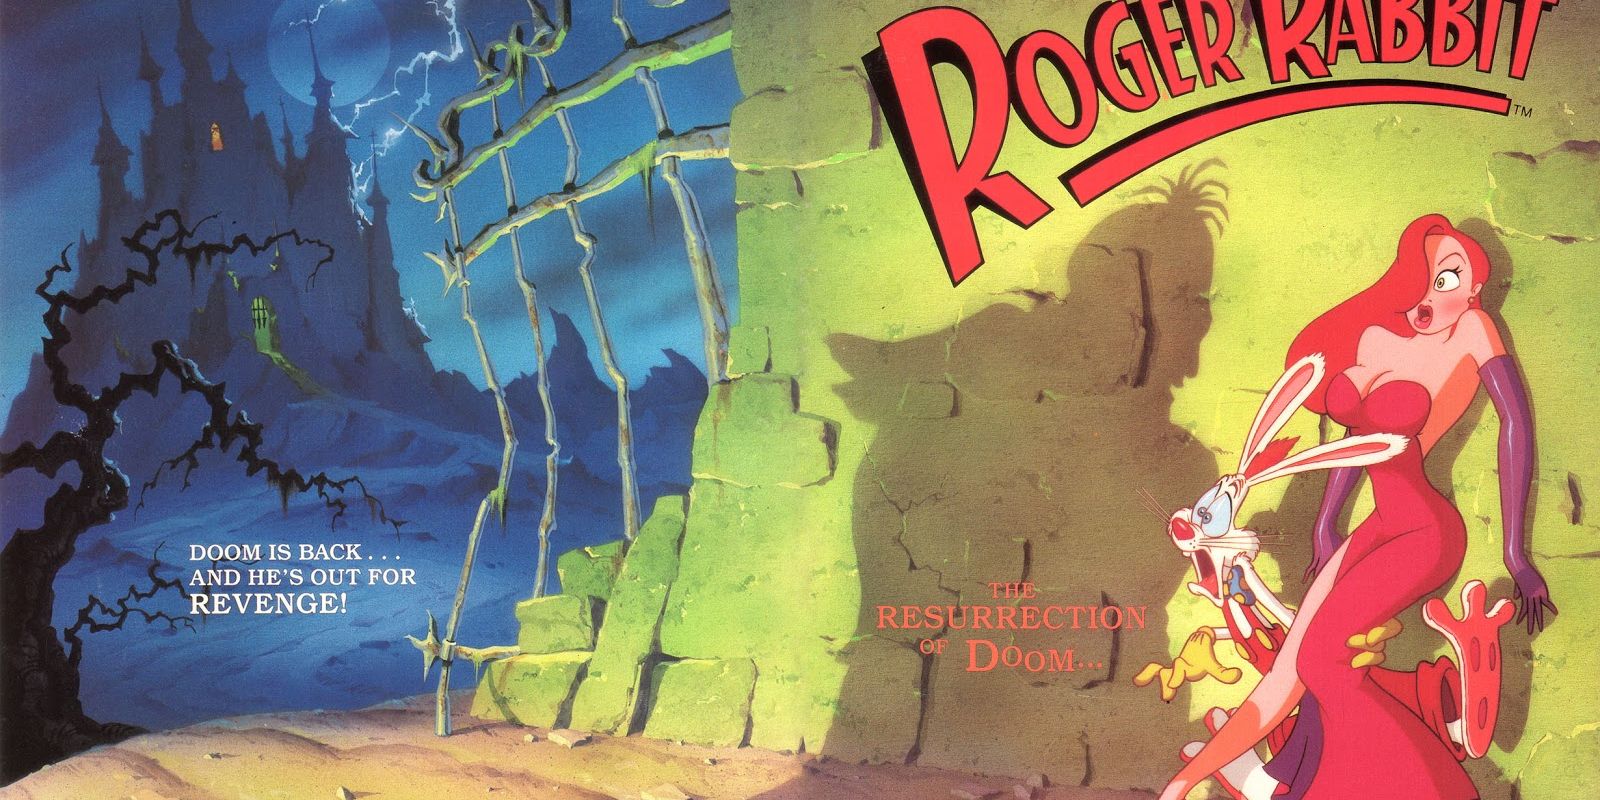 The cover of Roger Rabbit: The Resurrection of Doom.